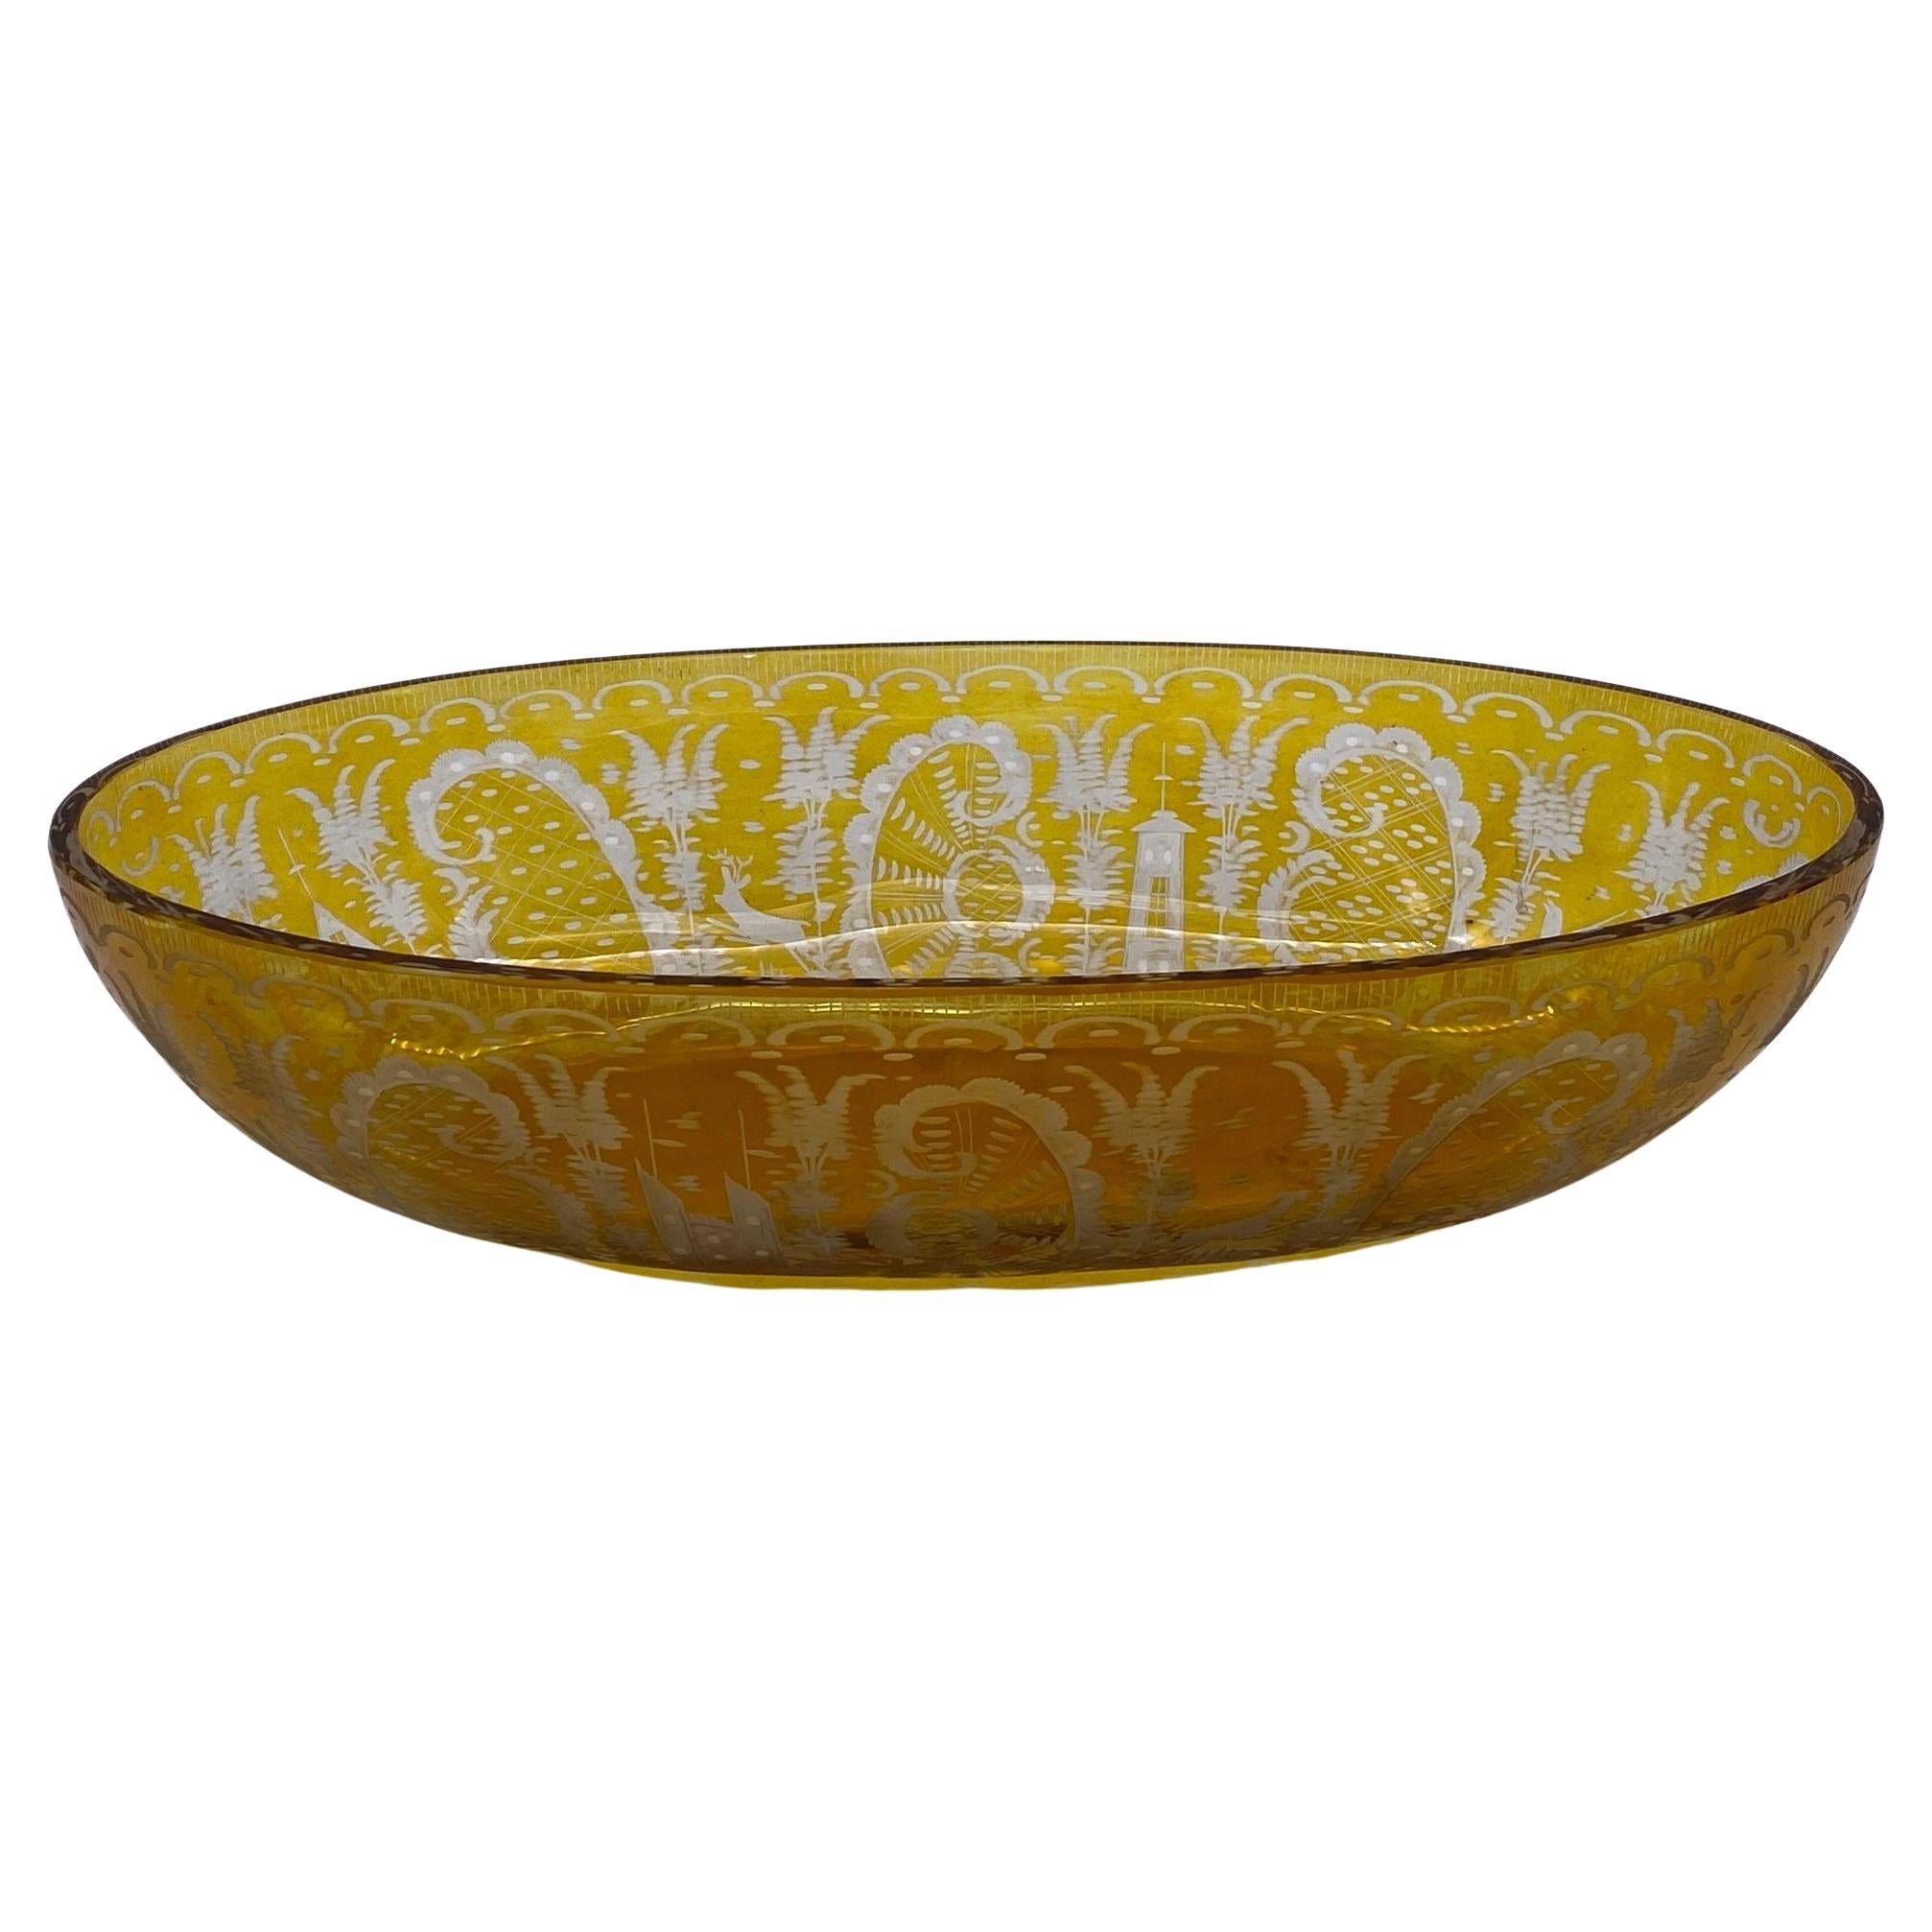 Bohemian Amber-Flashed Glass Bowl Flared Form, Circa 1900